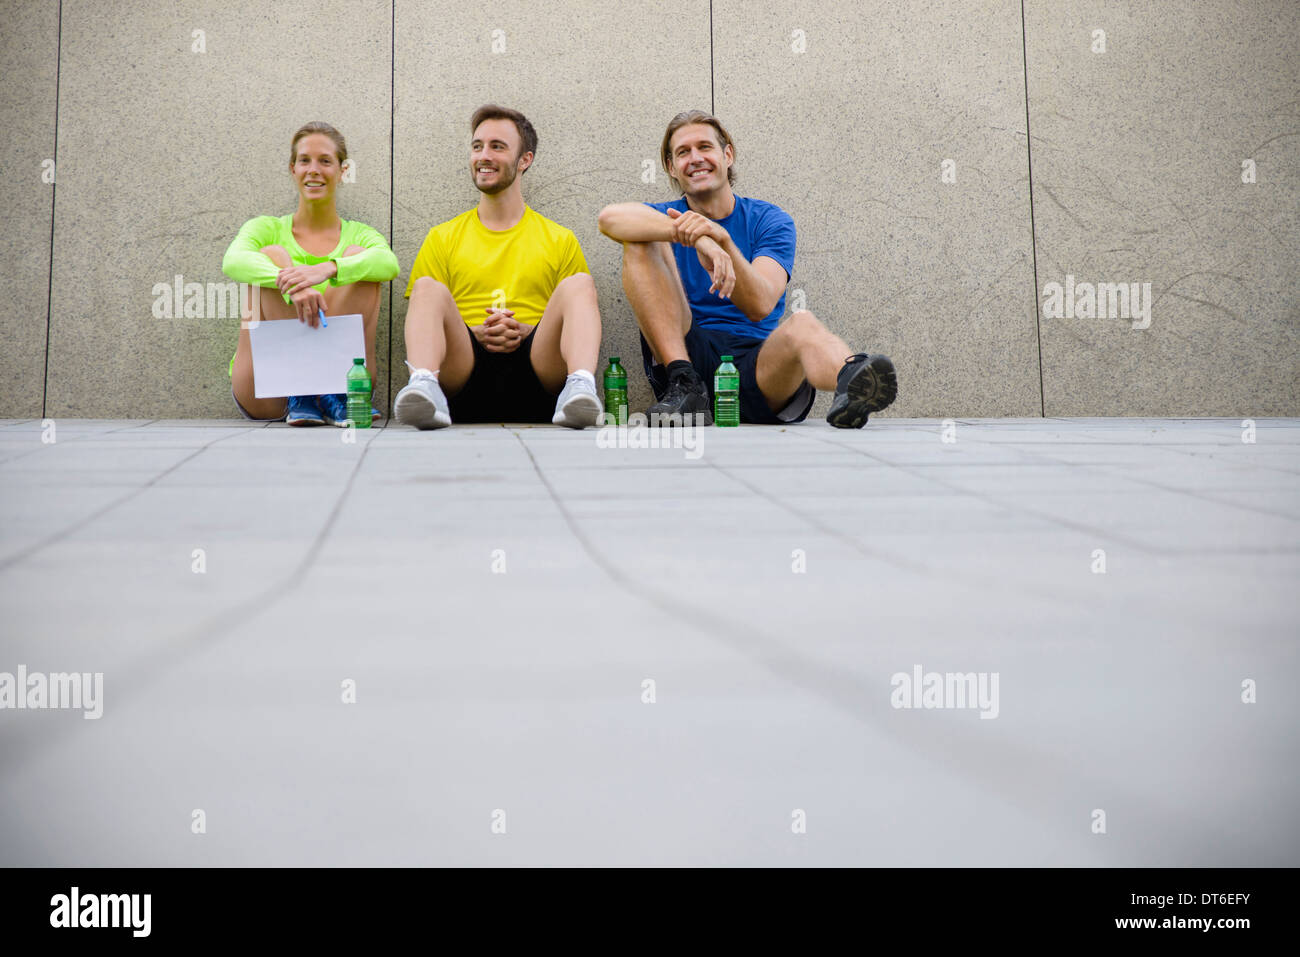 Three friends sitting on floor wearing sports clothing Stock Photo